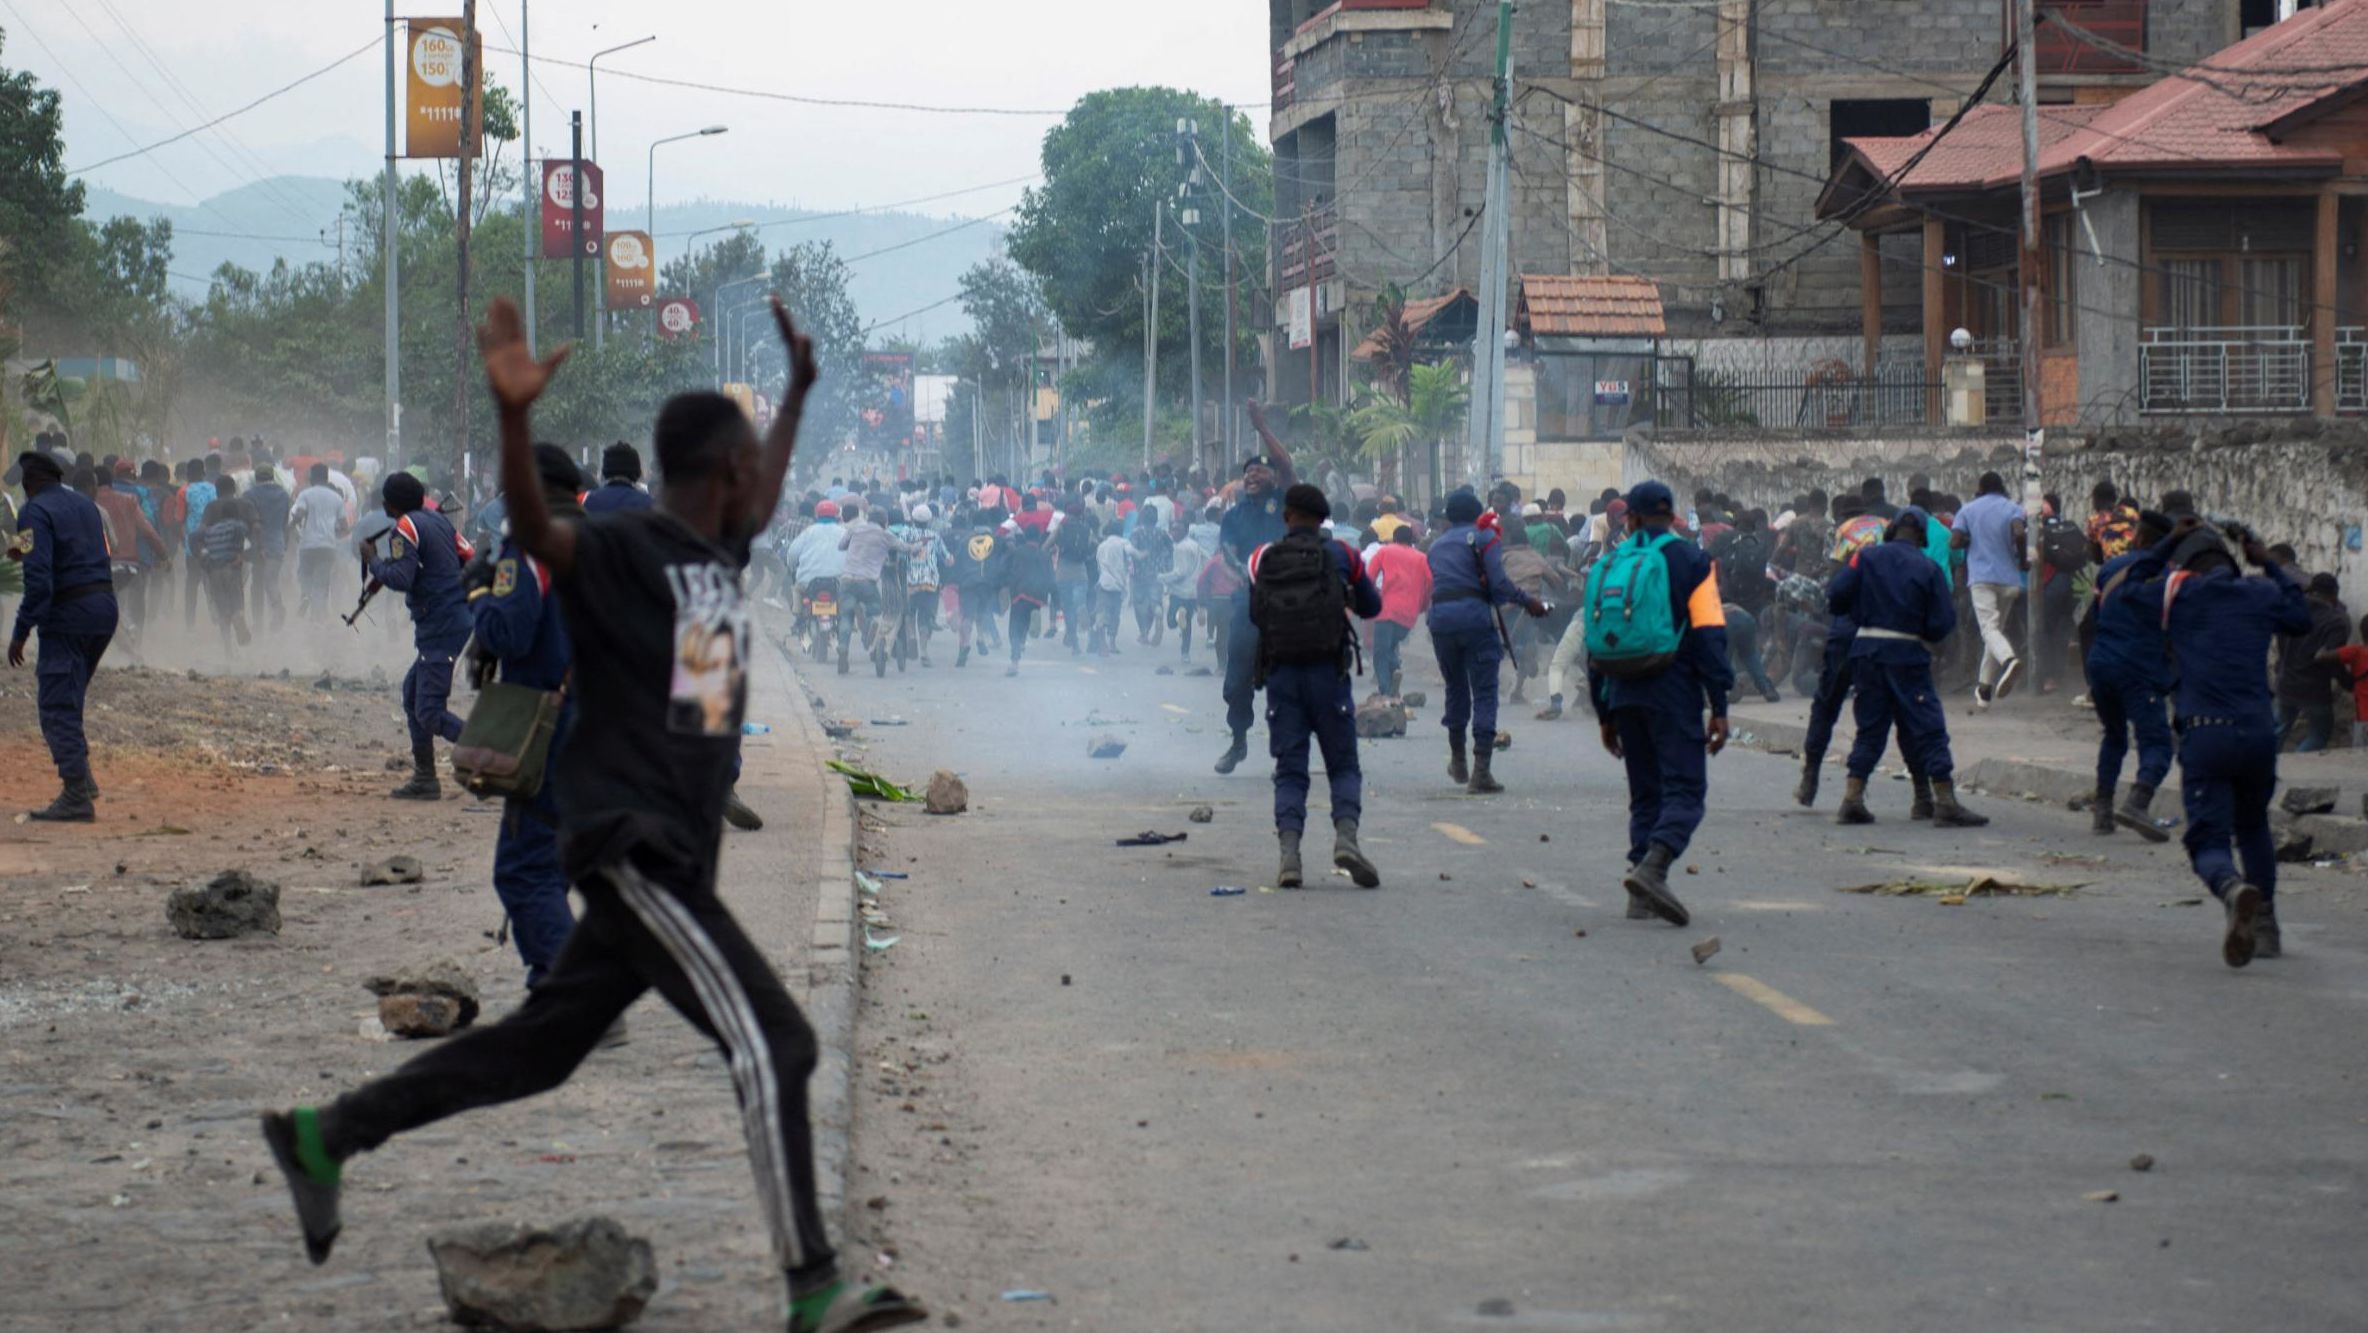 Congolese policemen disperse protesters along the road near the compound of a United Nations peacekeeping force's warehouse in Goma in the North Kivu province of the Democratic Republic of Congo July 26, 2022.